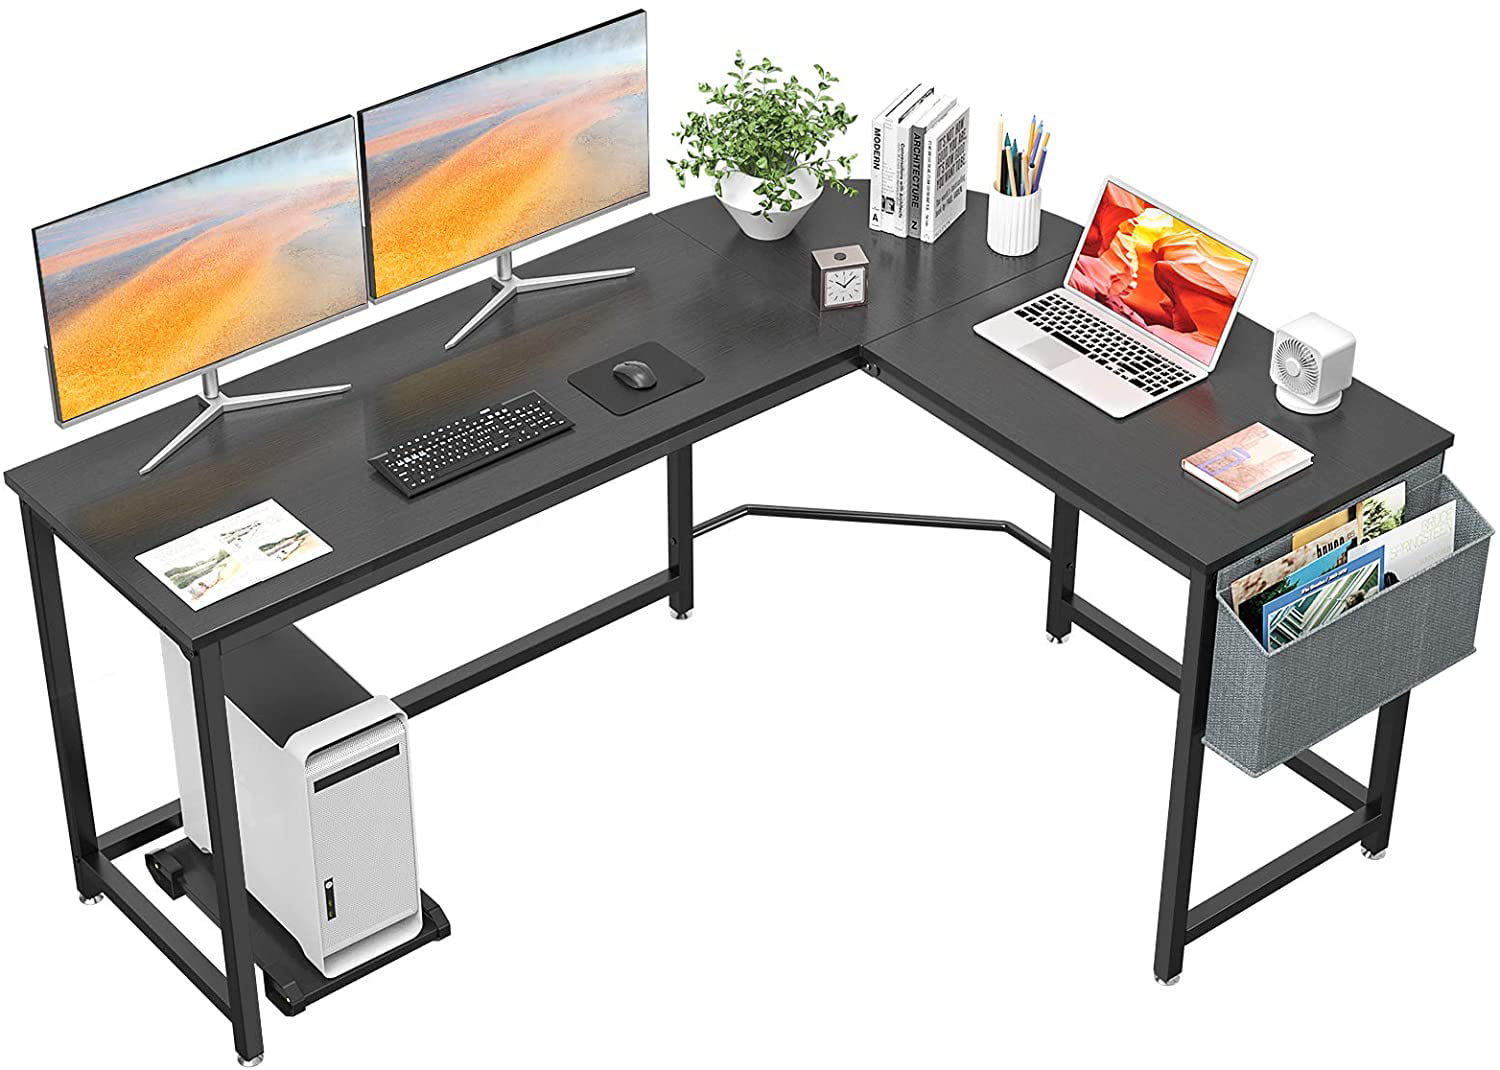 Free Monitor Stand DOSLEEPS Computer Desk L-Shaped Large Corner PC Laptop Study Table Workstation Gaming Desk for Home and Office Wood & Metal Black Wood Grain 